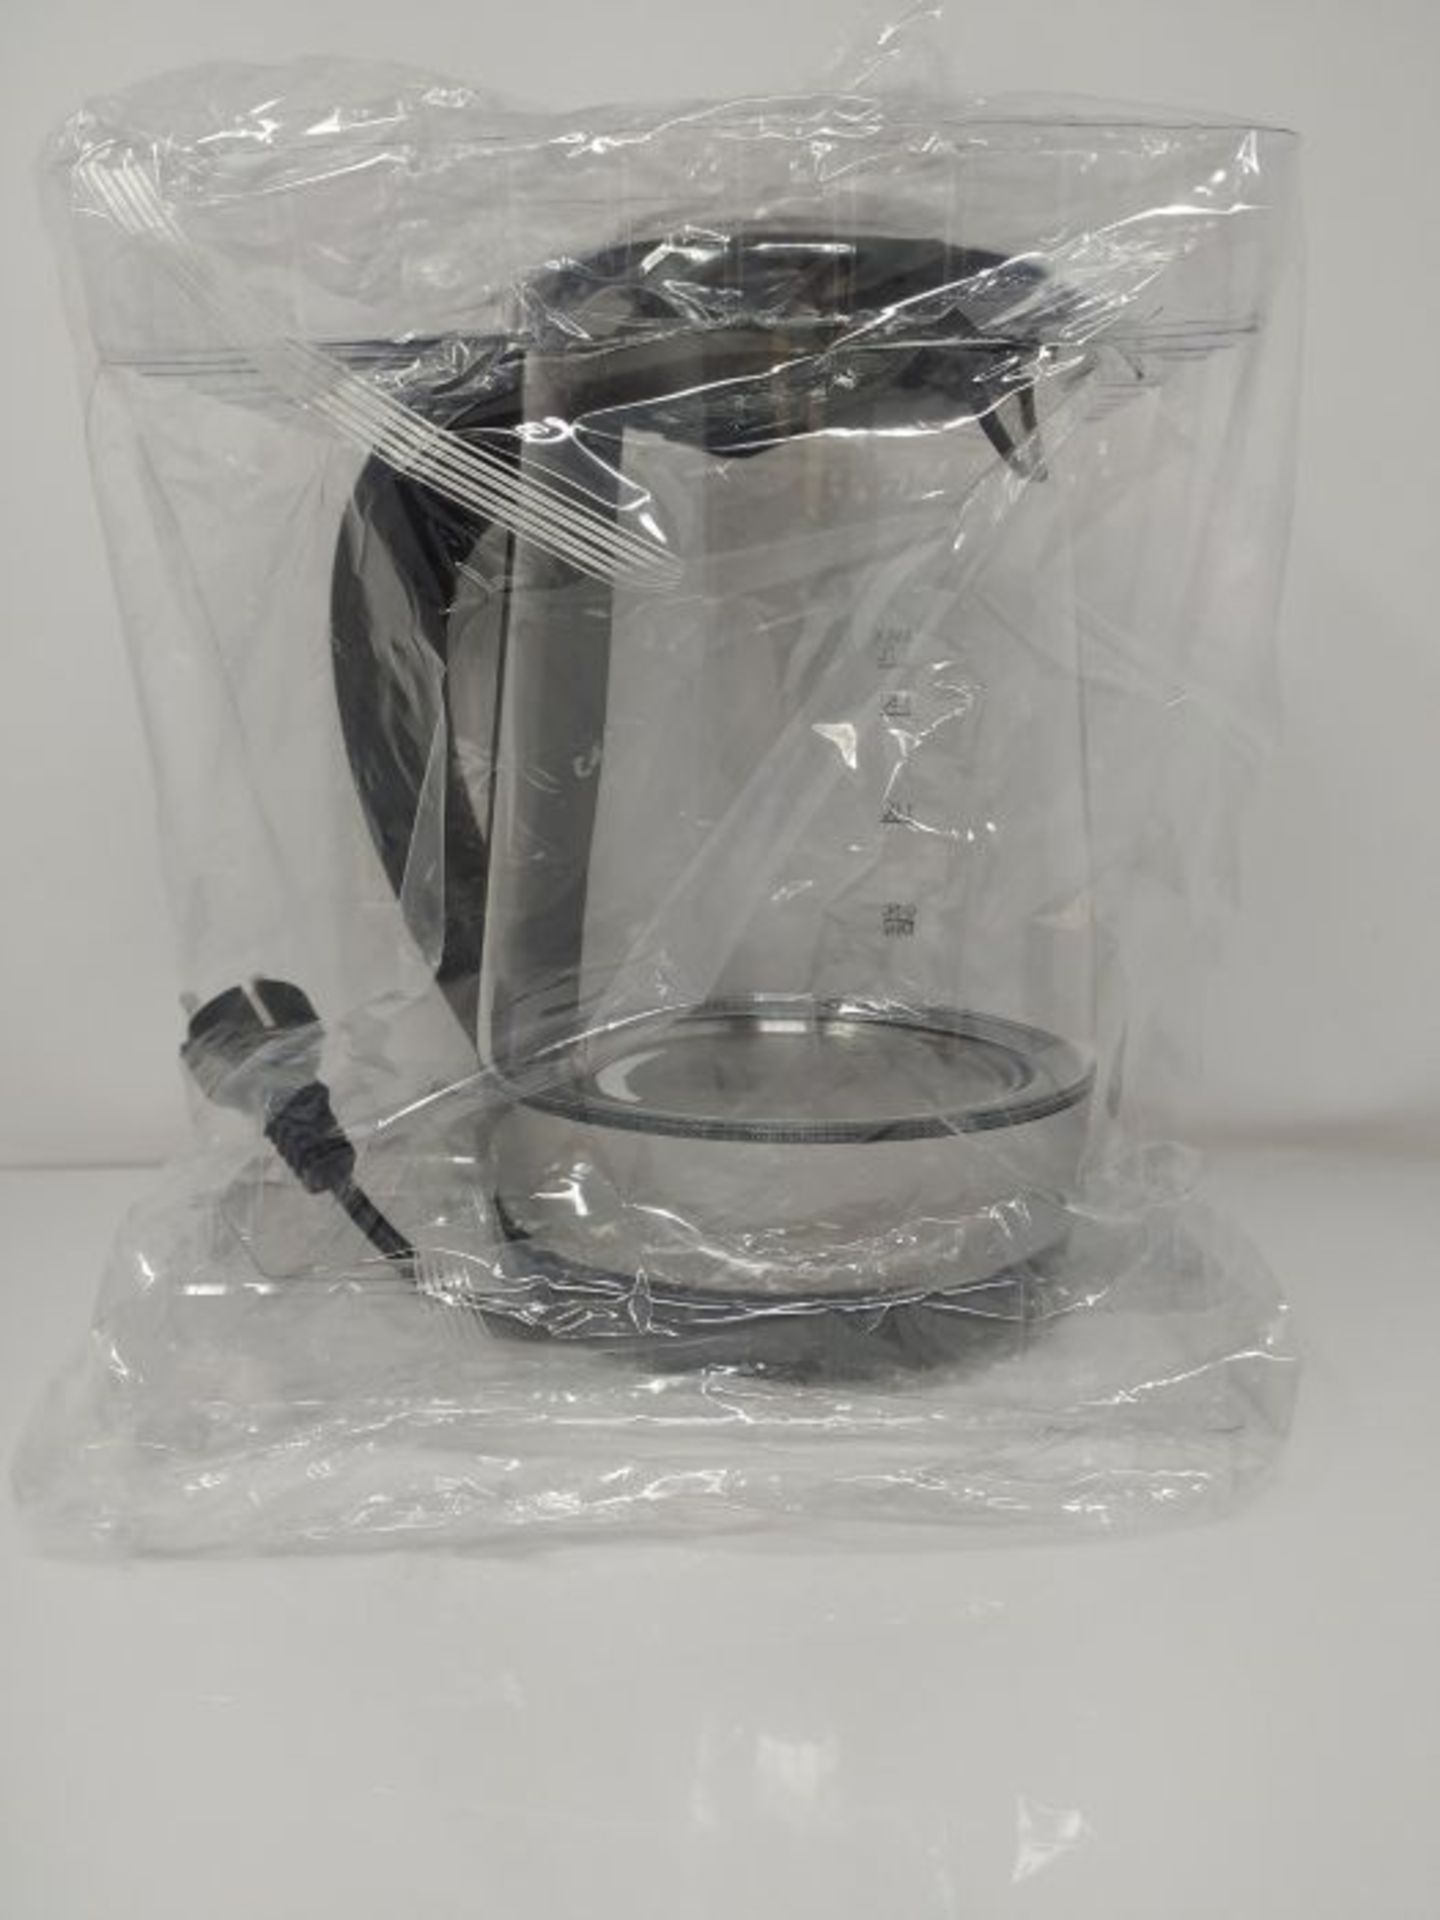 Emerio WK-123131 Glass electric kettle 1.7L 2200W Stainless steel/Black - Image 3 of 3